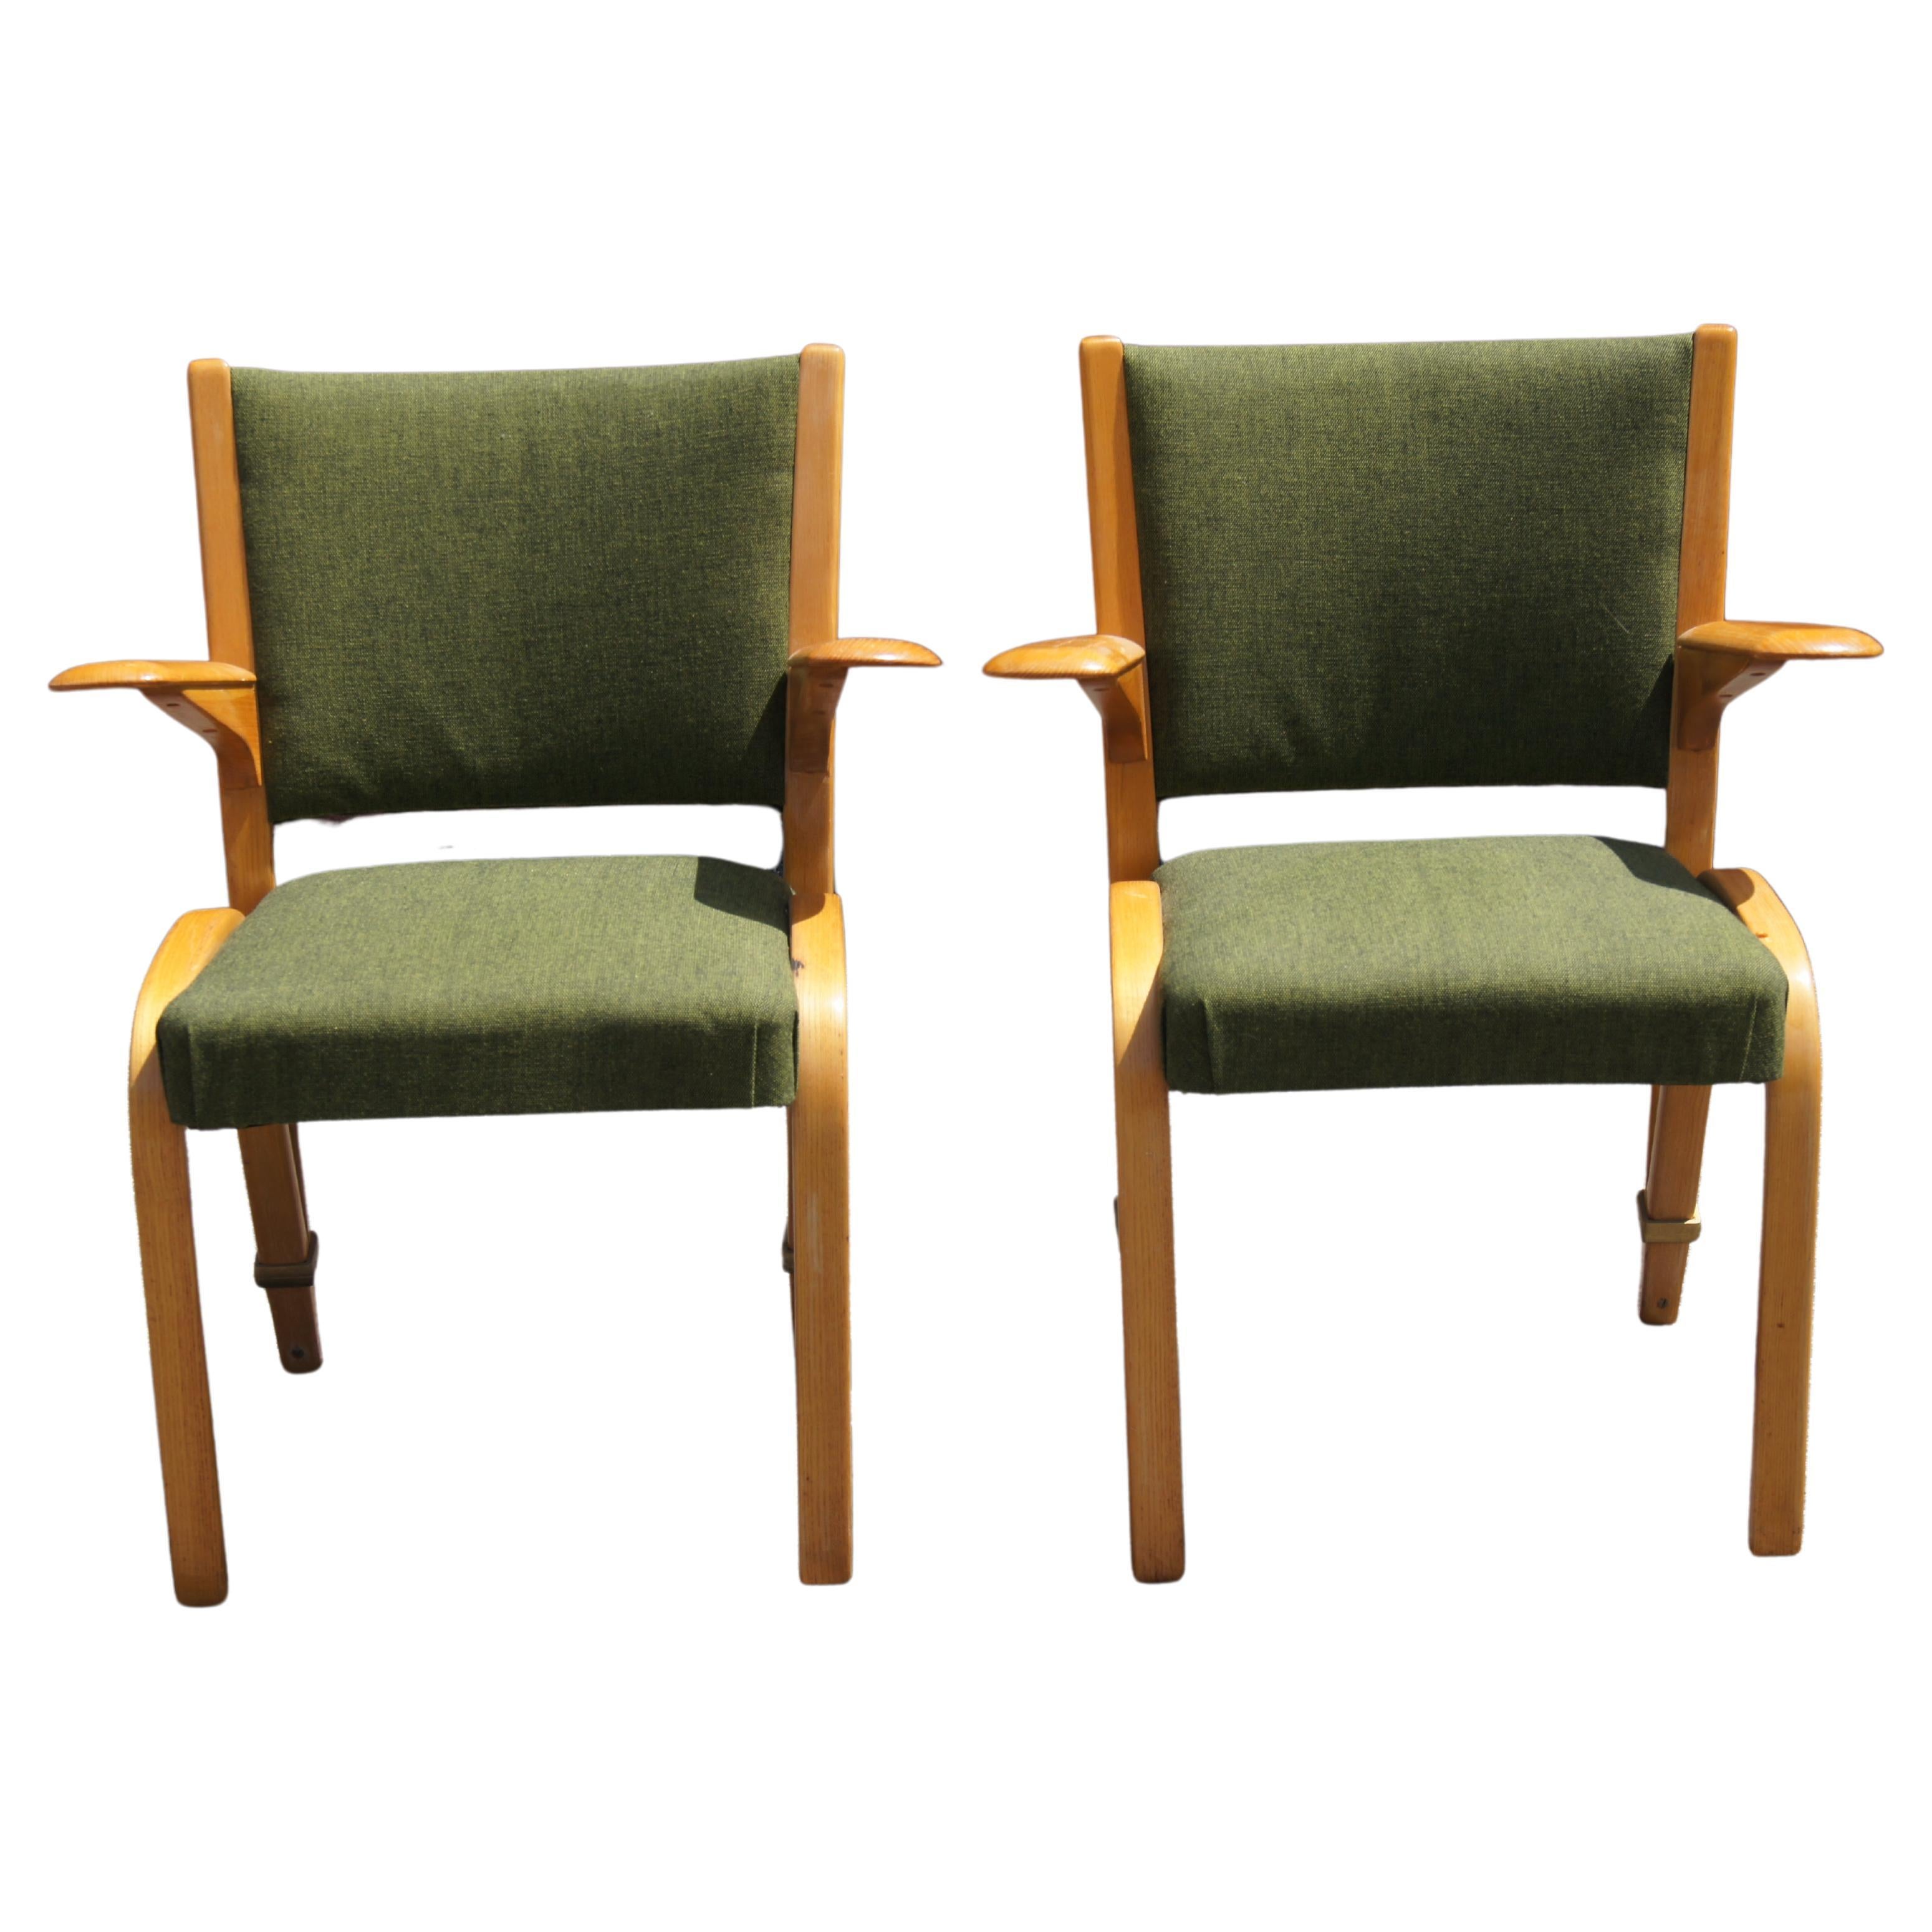 Pair of Ash Bow Wood Series Armchairs by Steiner of France